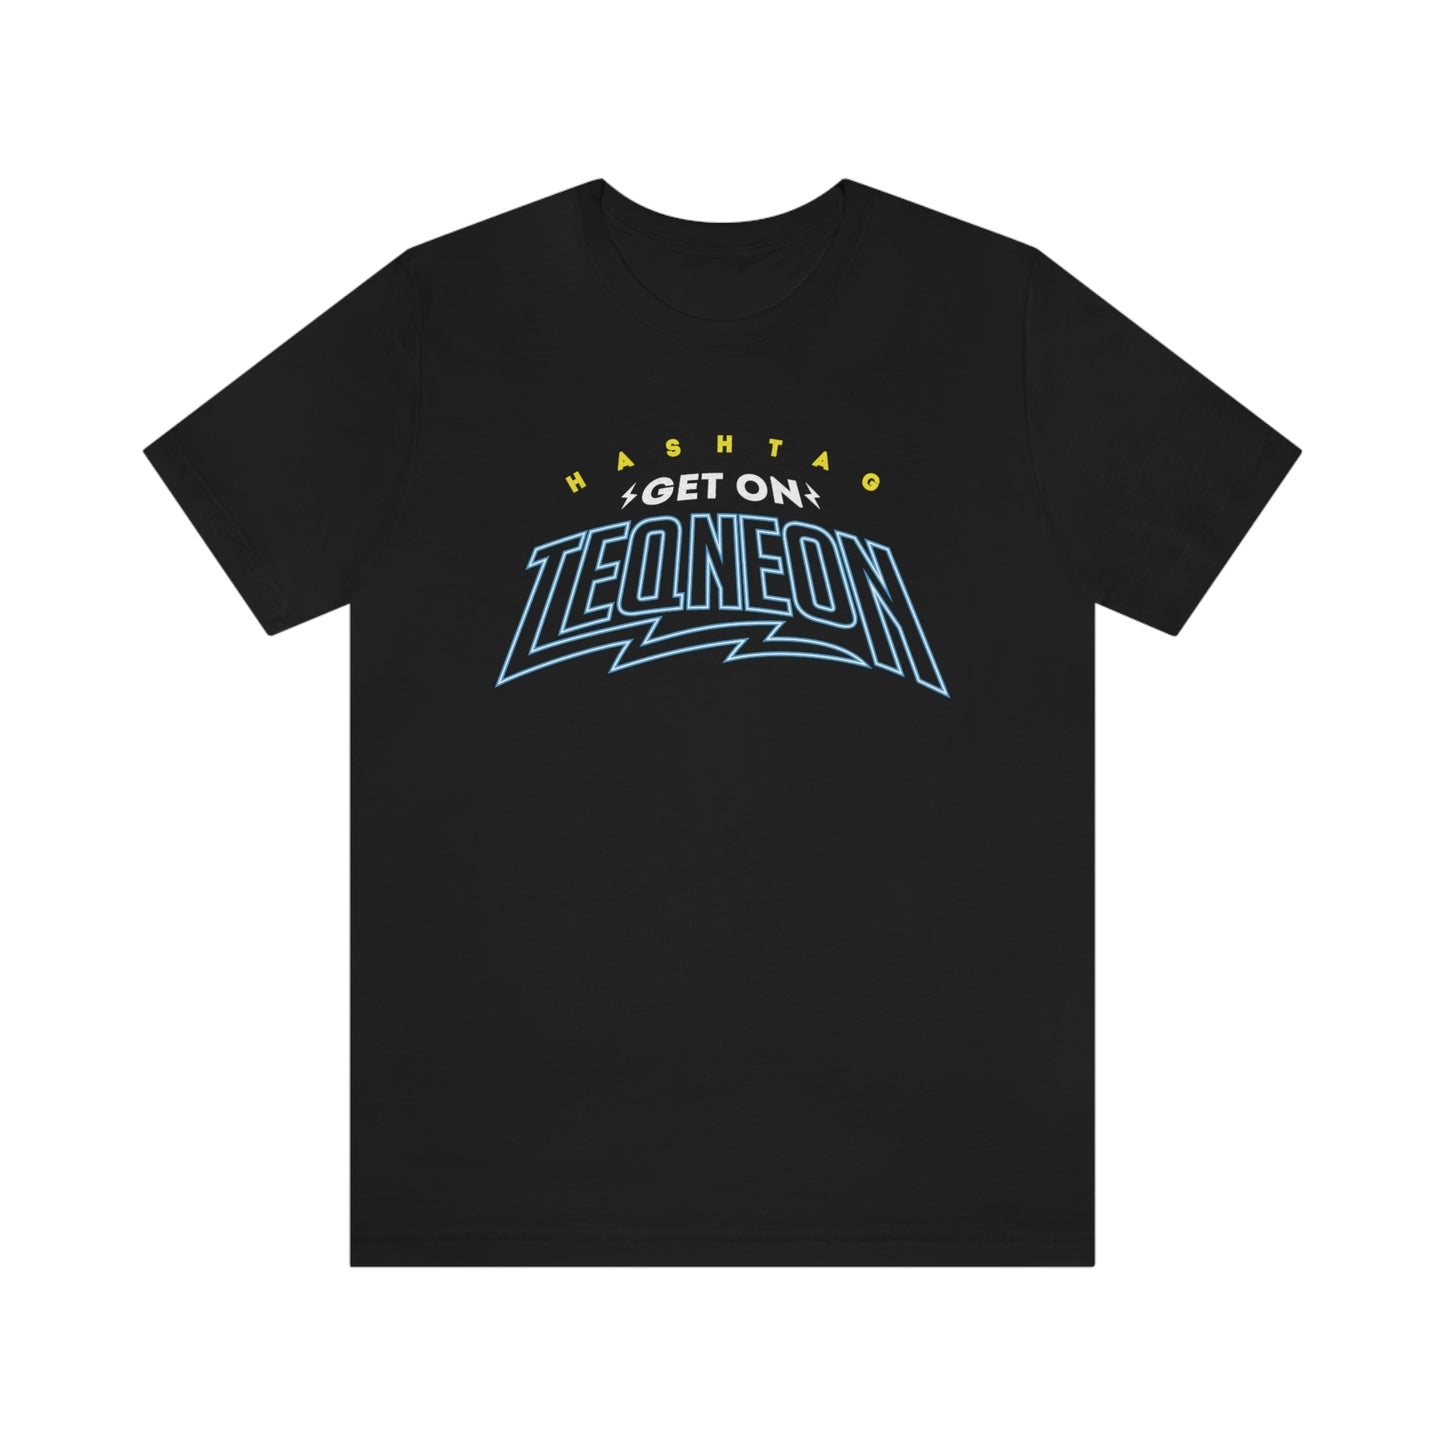 Black T-Shirt featuring a promotional design in yellow, white, and blue that says 'HASHTAG GET ON TEQNEON' from the TEQNEON Word Craft collection